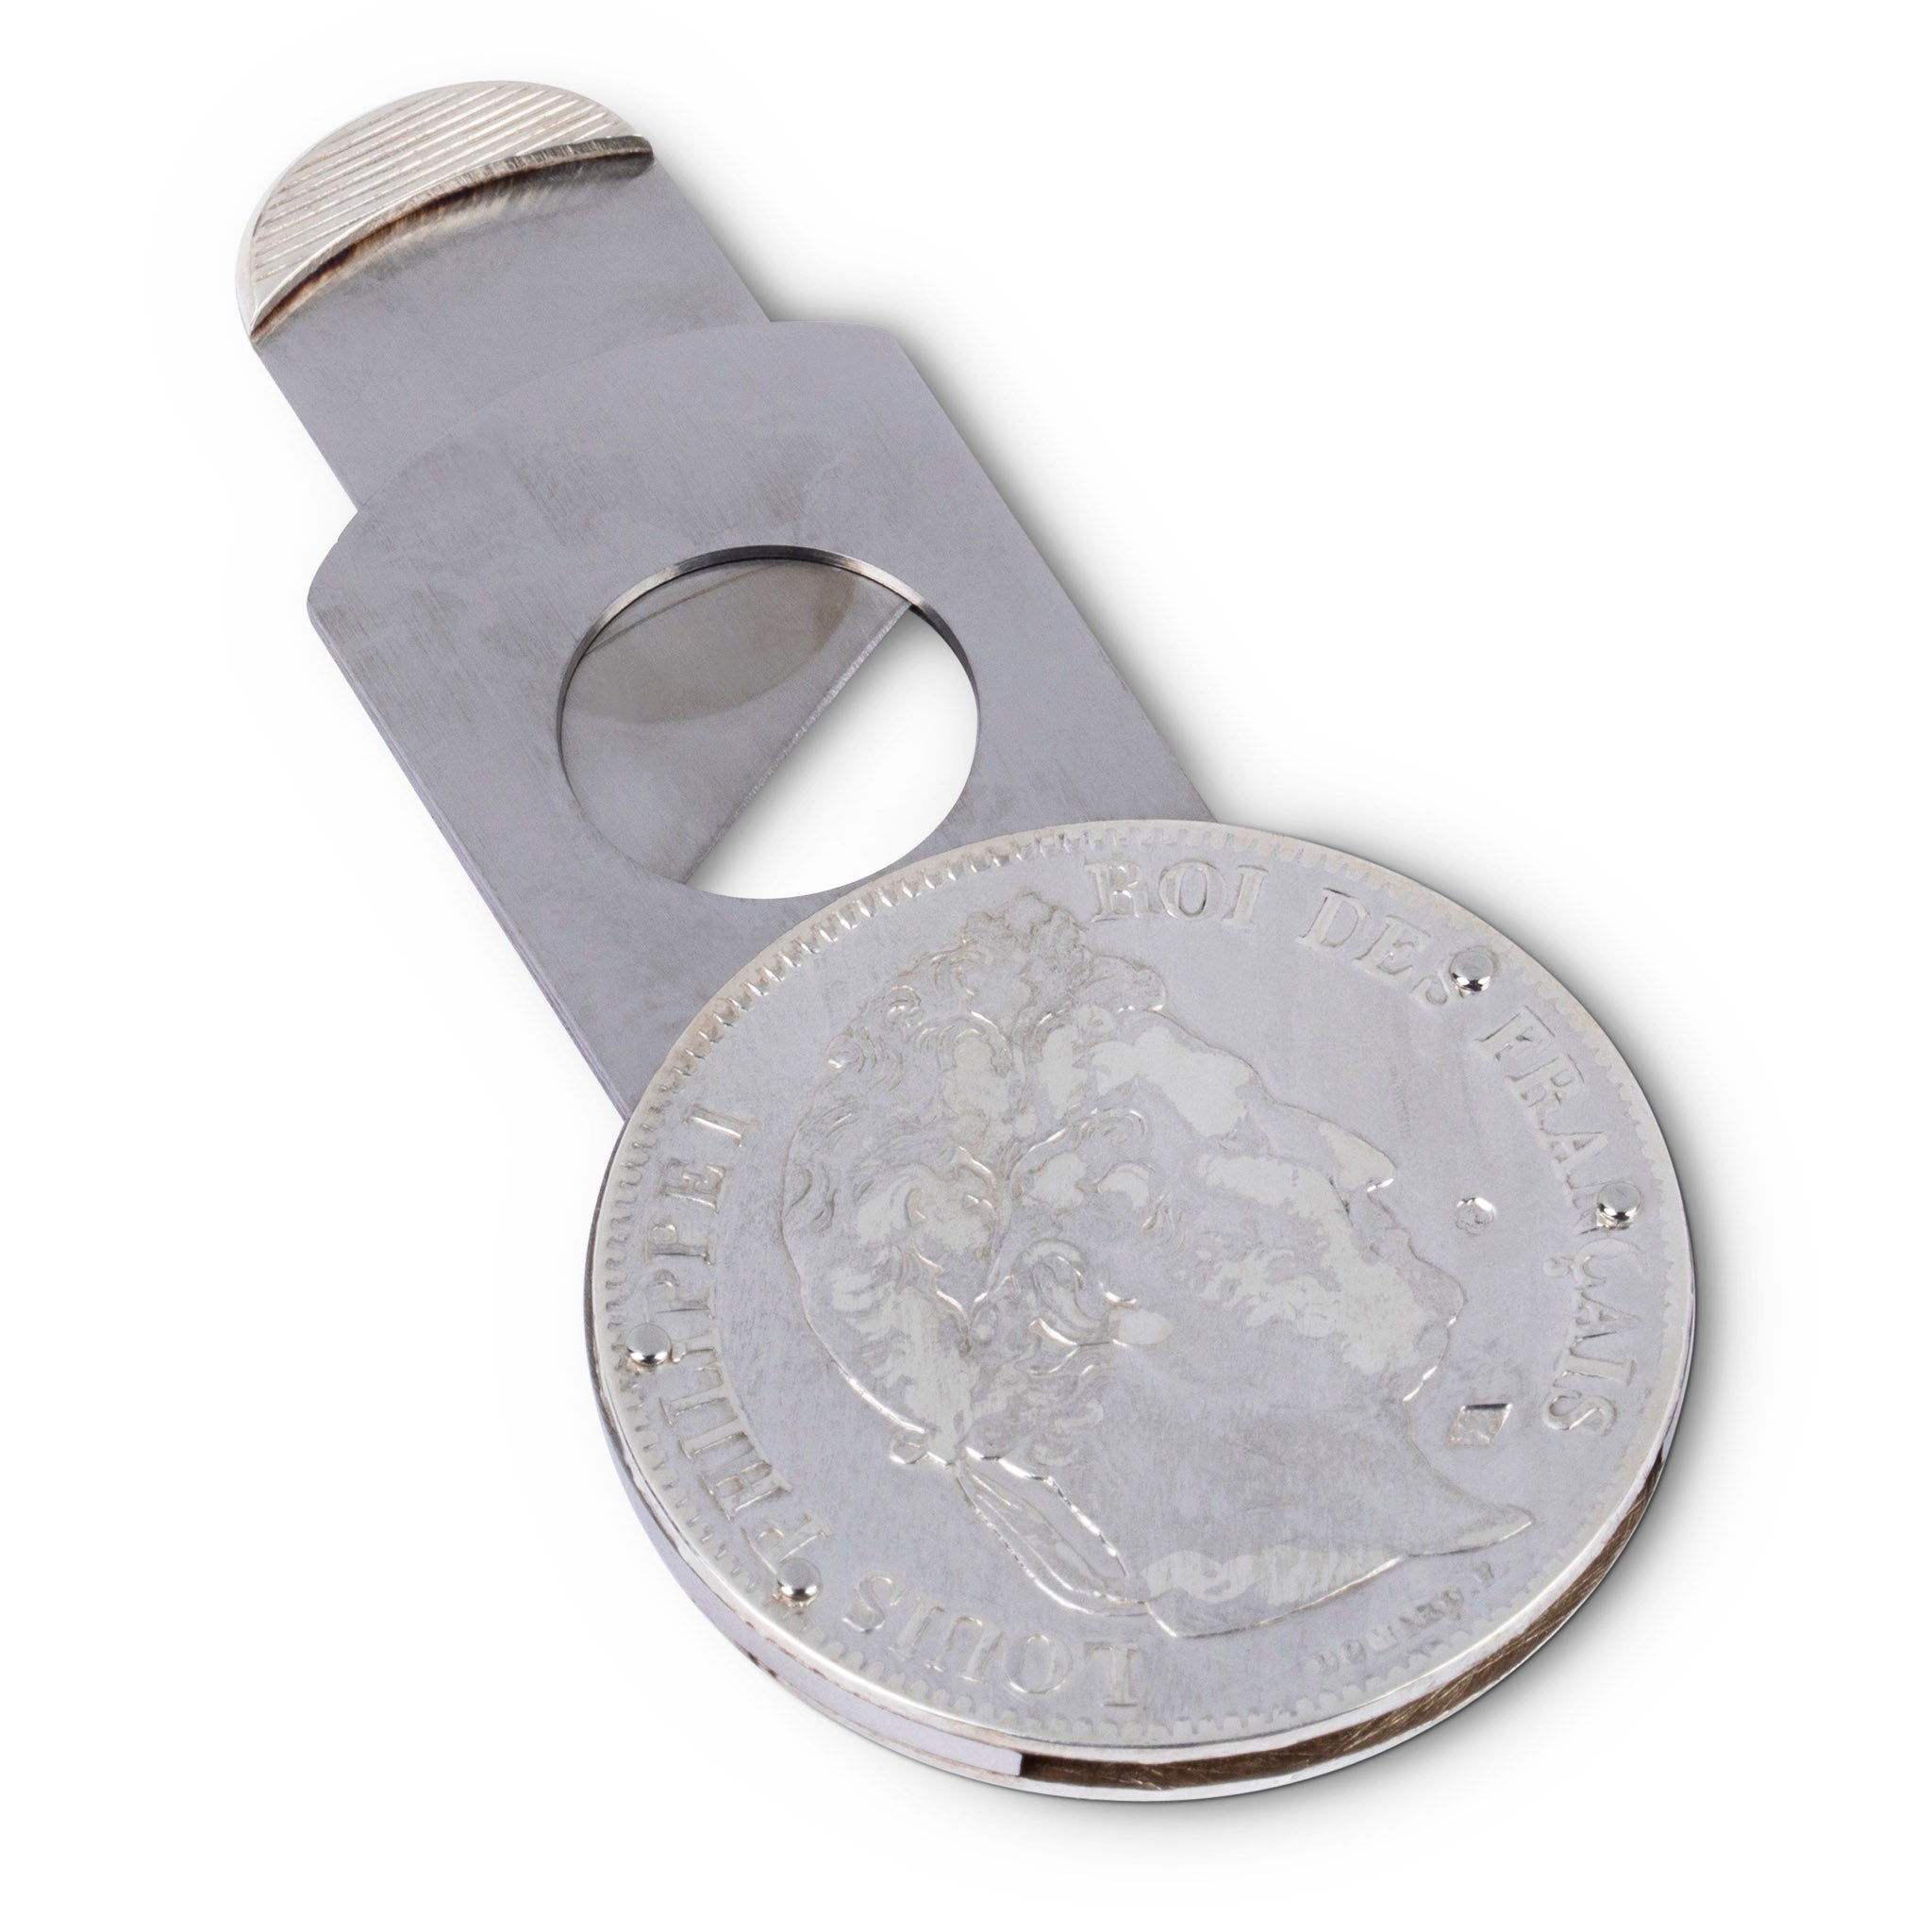 Eloi Pernet 1834 French Five Francs Coin Cigar Cutter